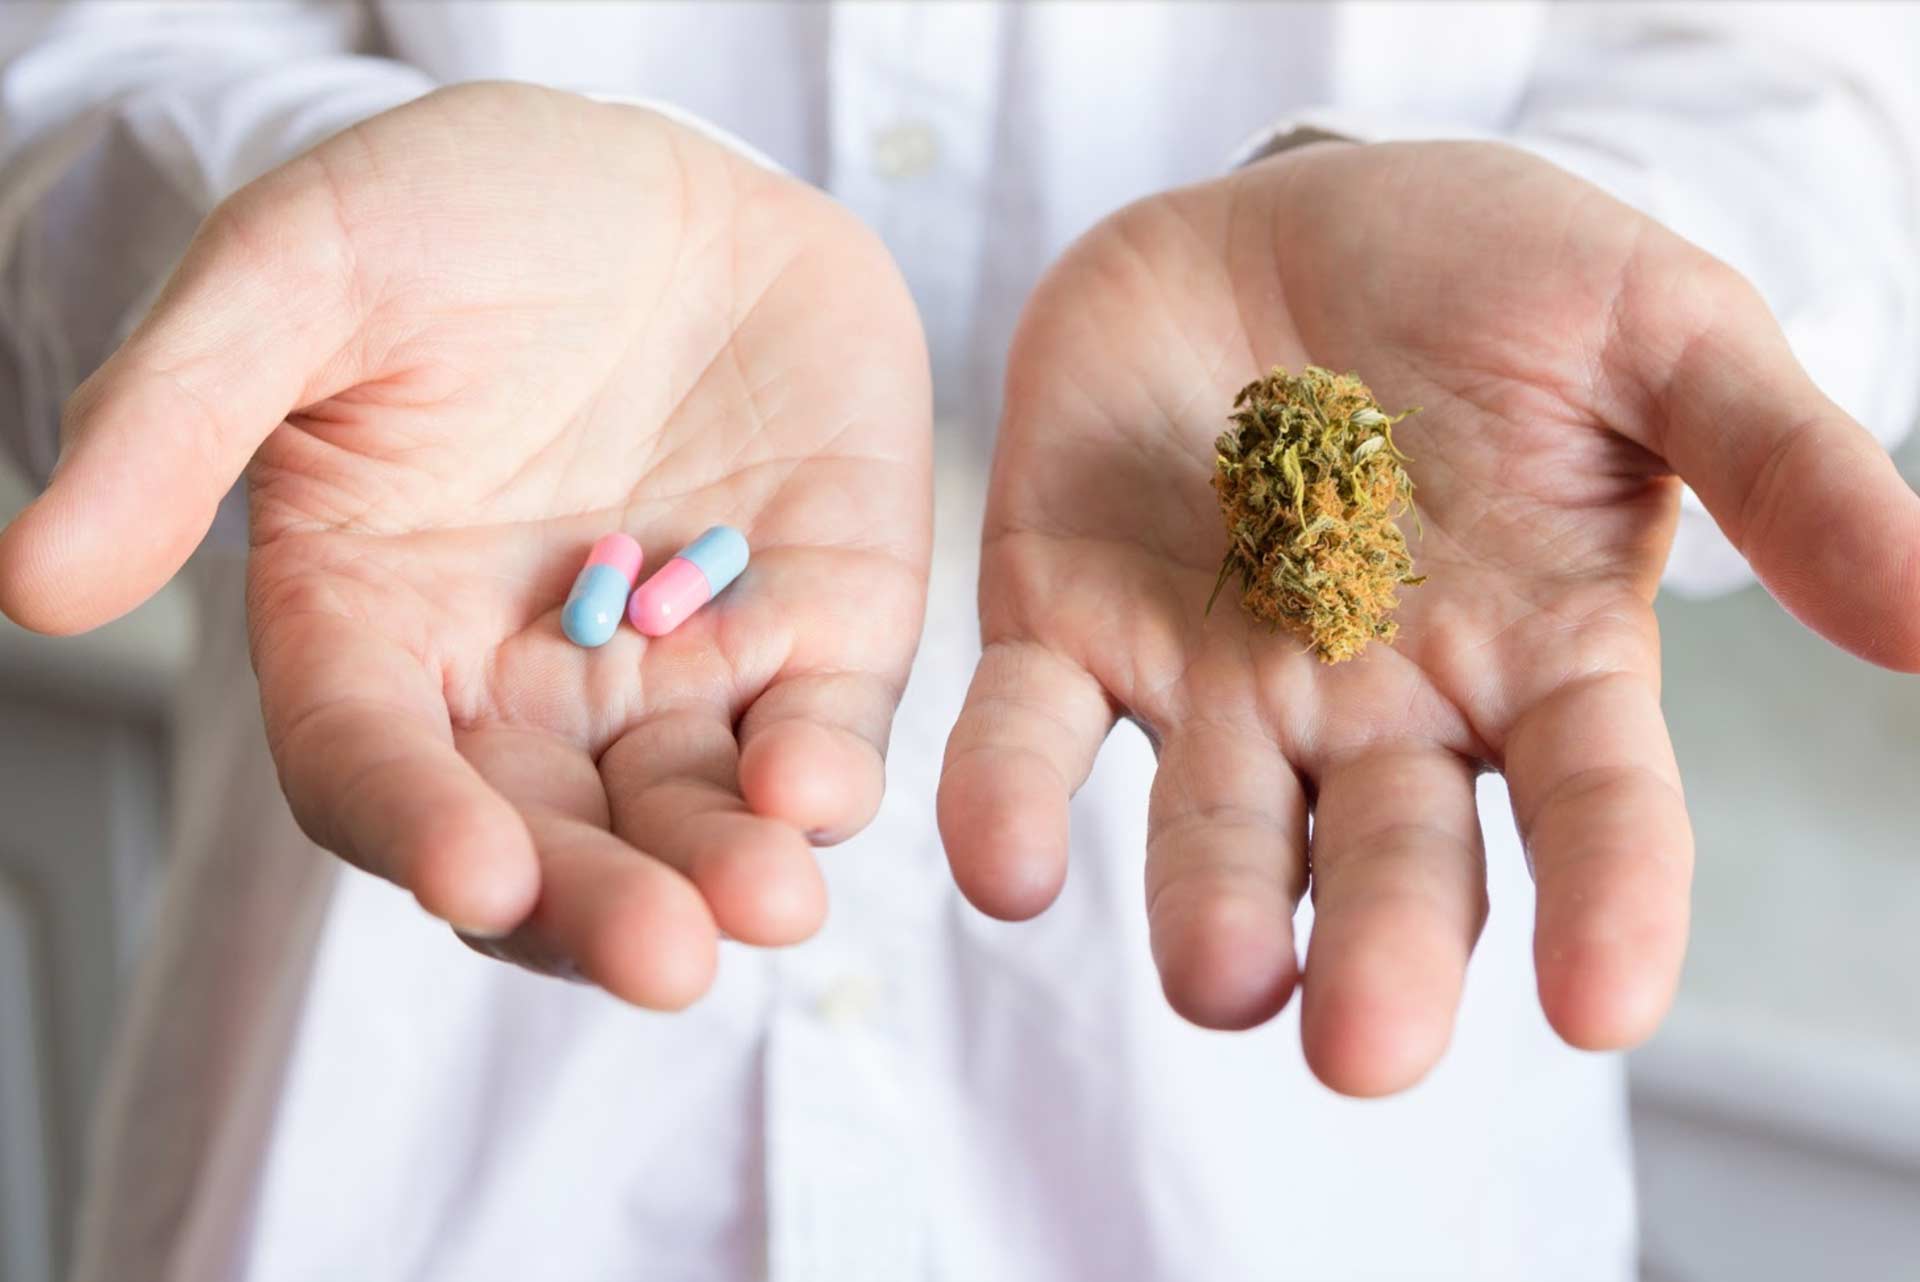 Open hands holding cannabis flower in one hand and pharmaceutical pills in the other hand